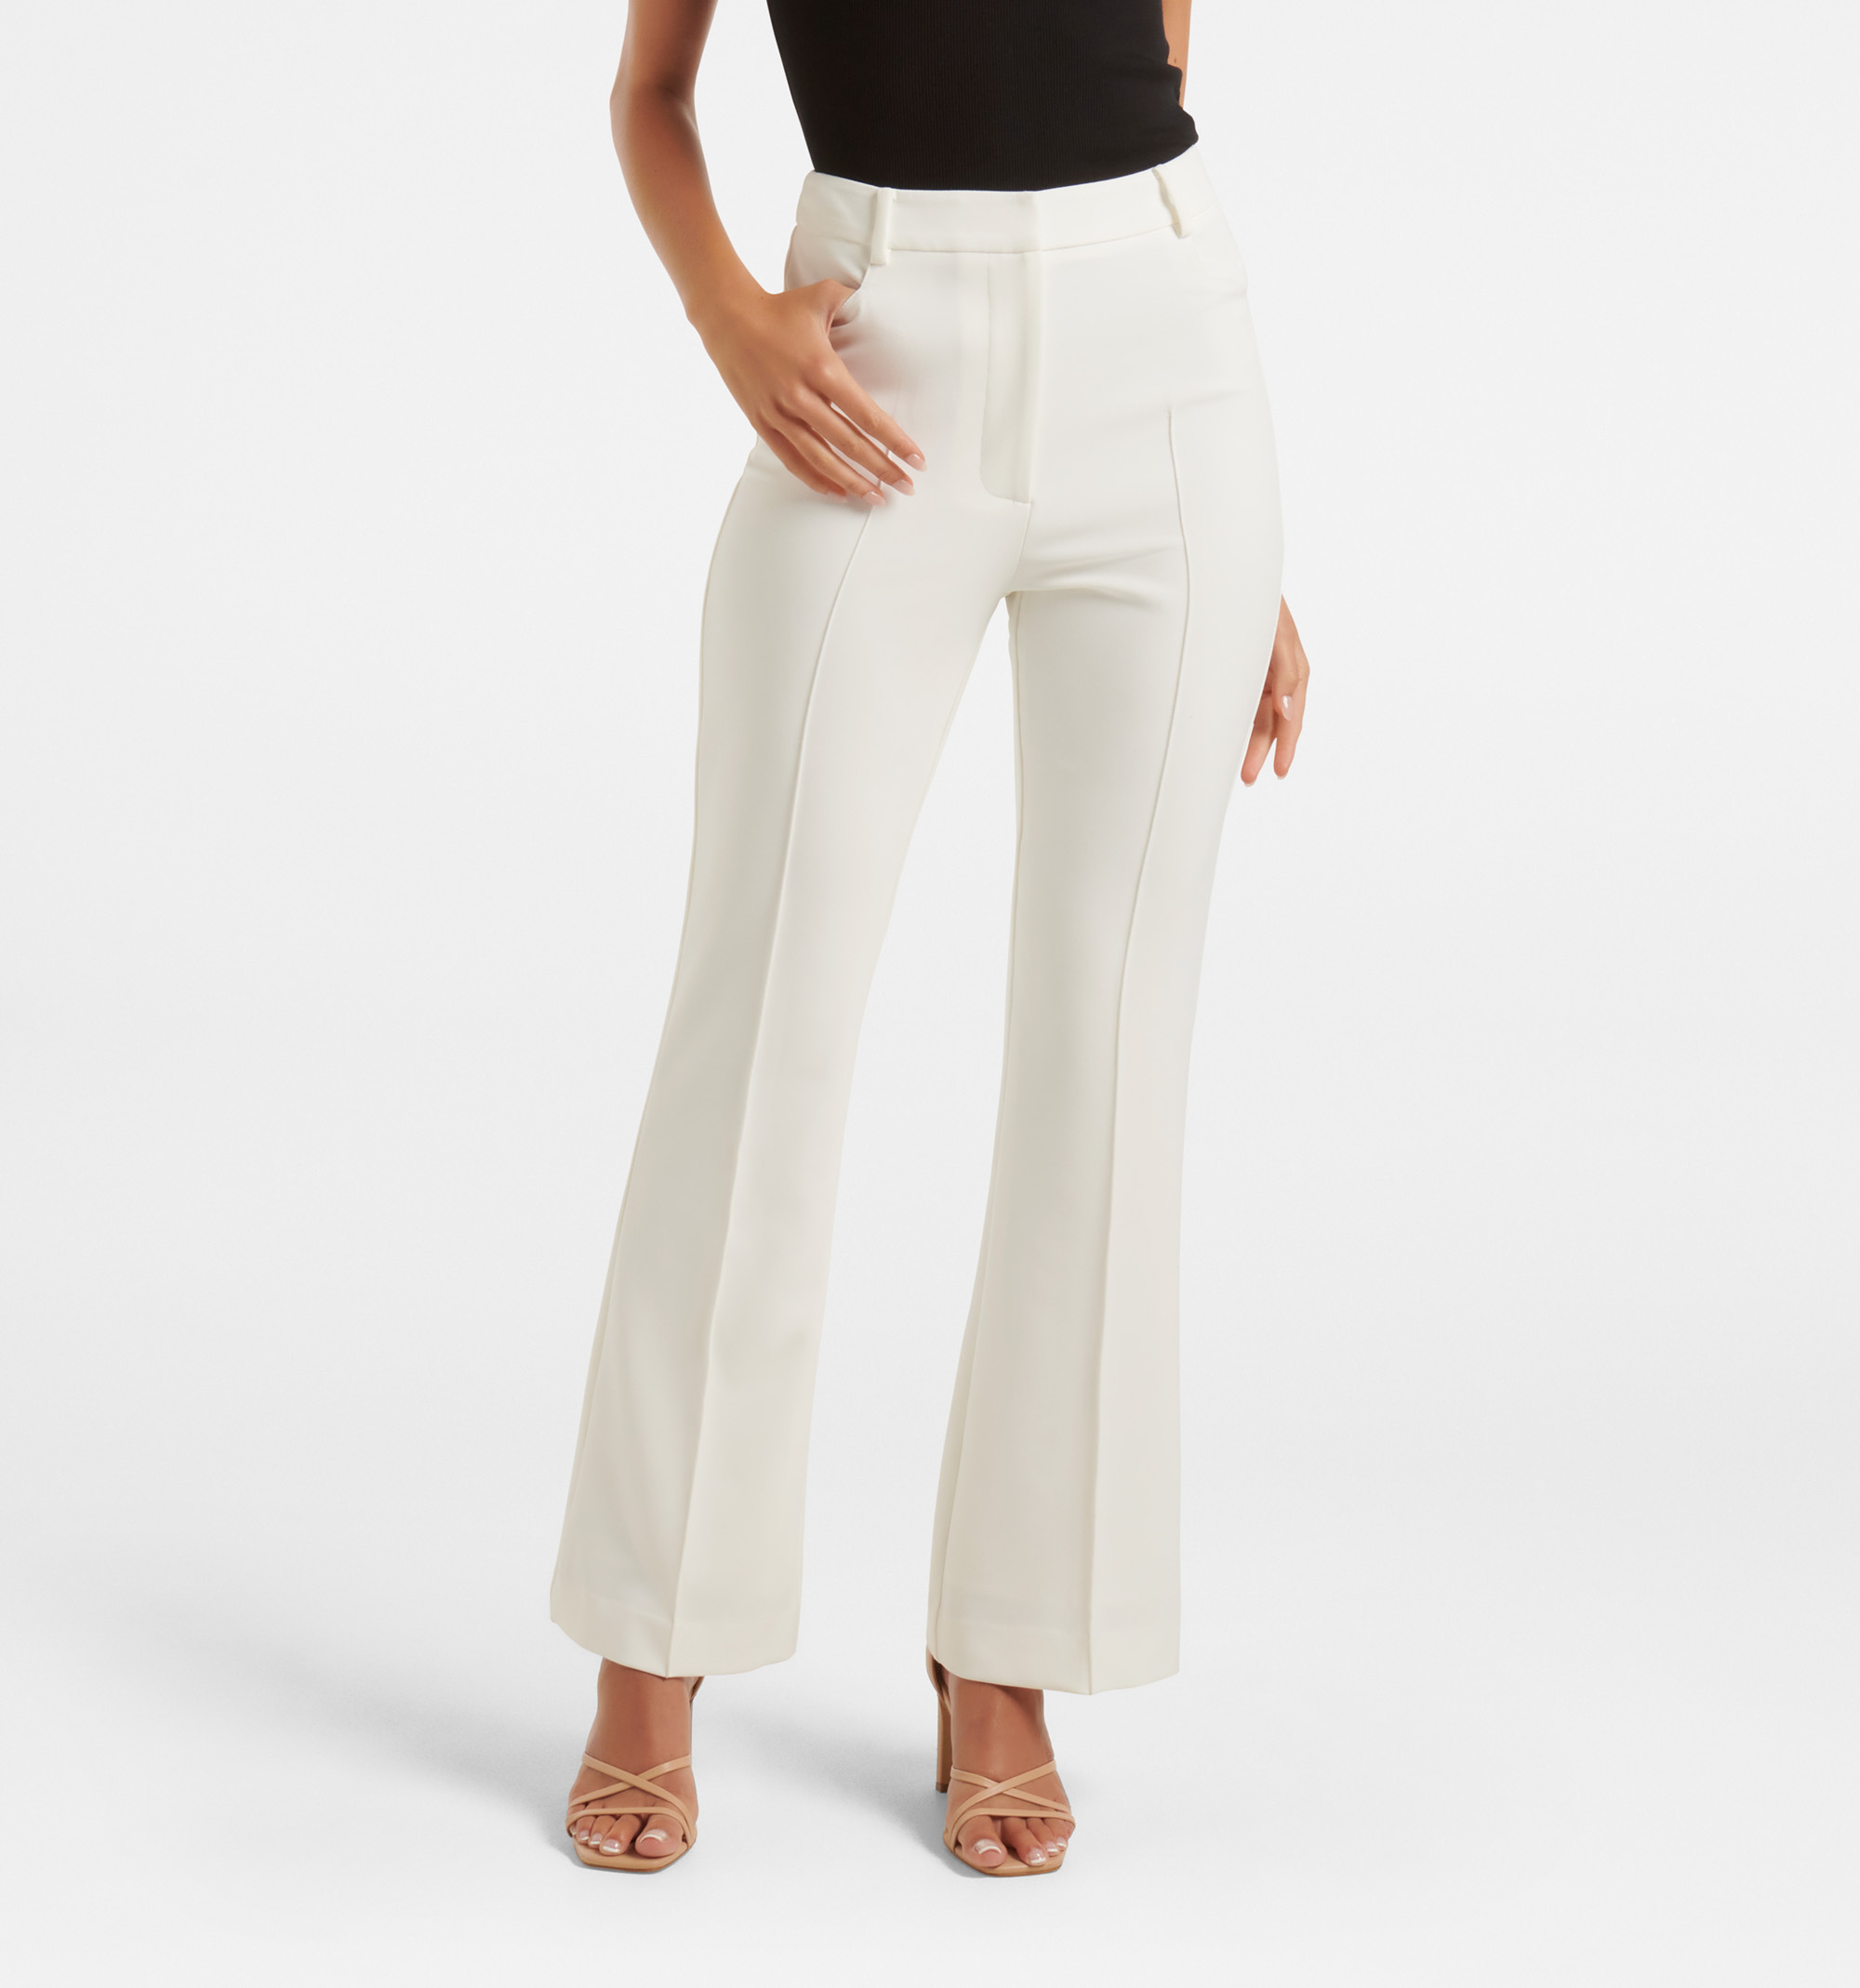 Buy Knit Flare Trousers Online In India -  India